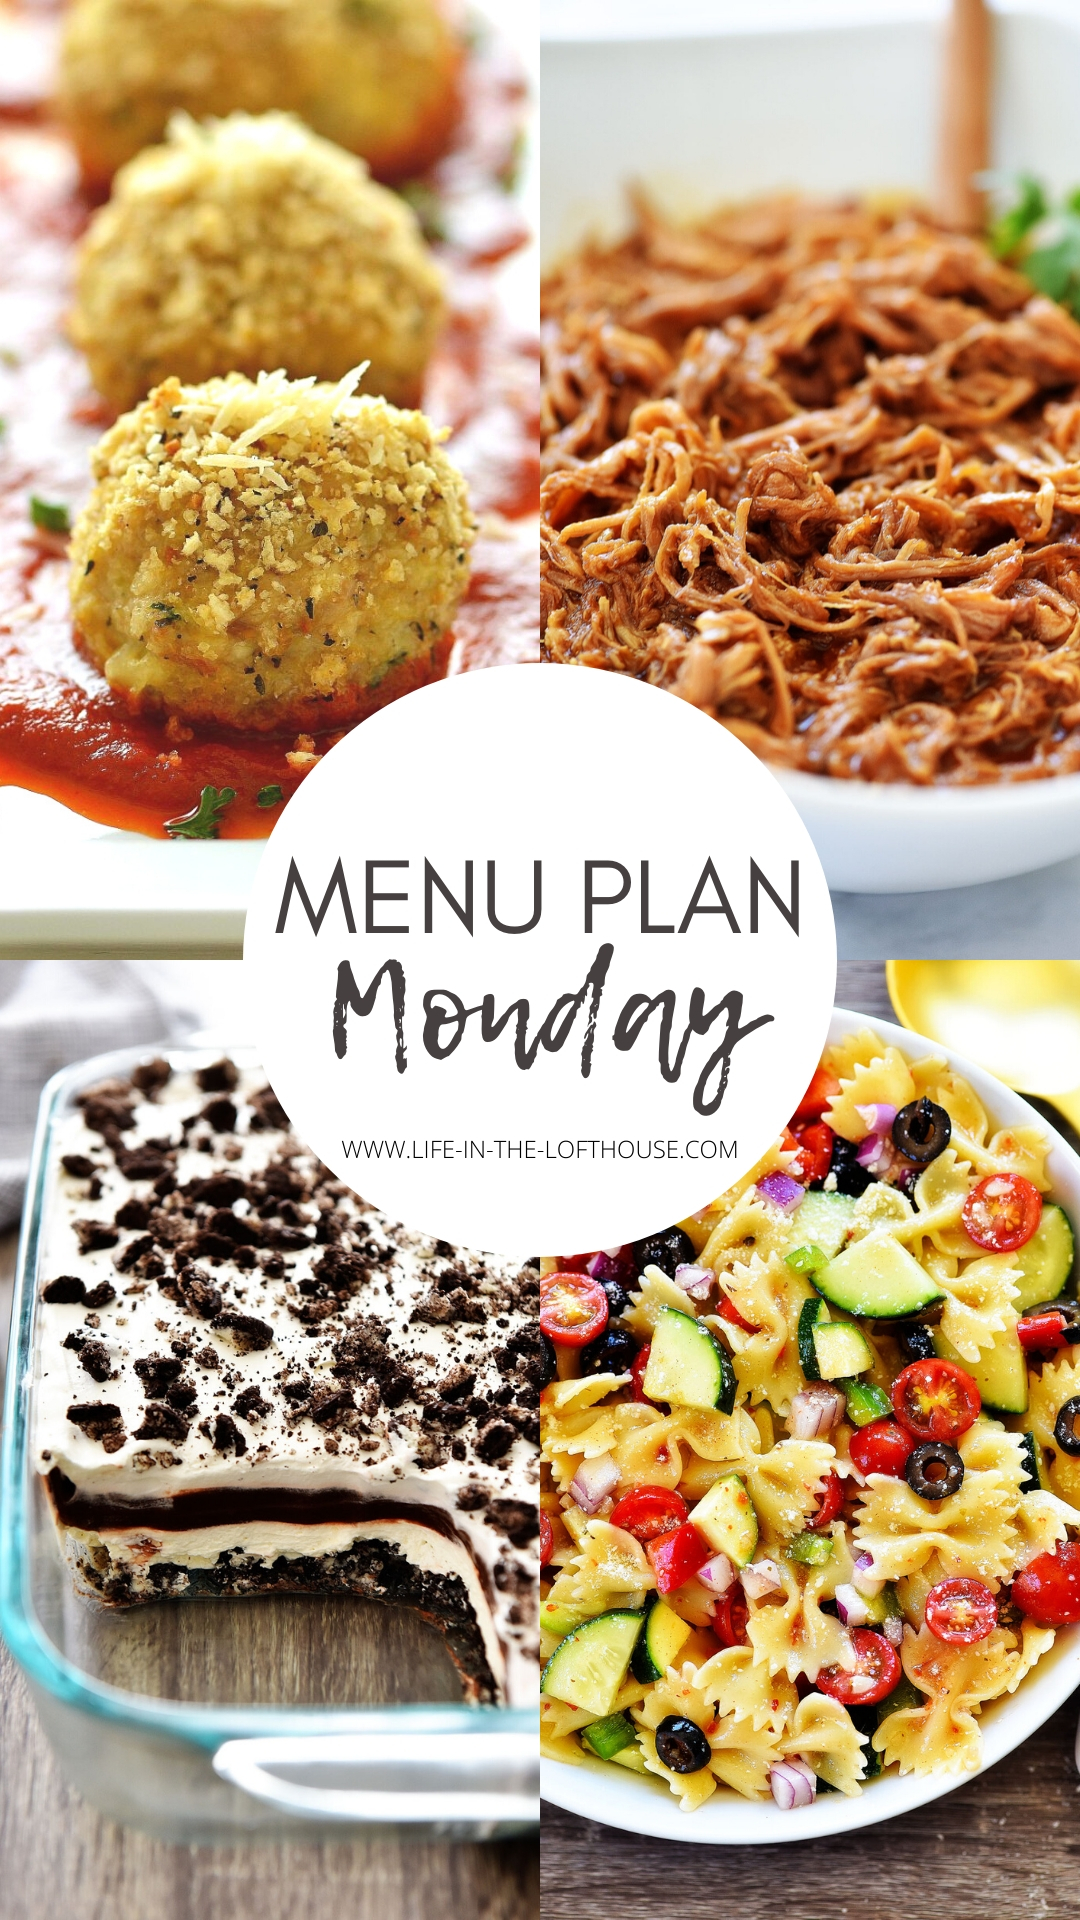 Menu Plan Monday is a menu of weekly dinner ideas. Each menu includes six dinners and one dessert. Life-in-the-Lofthouse.com